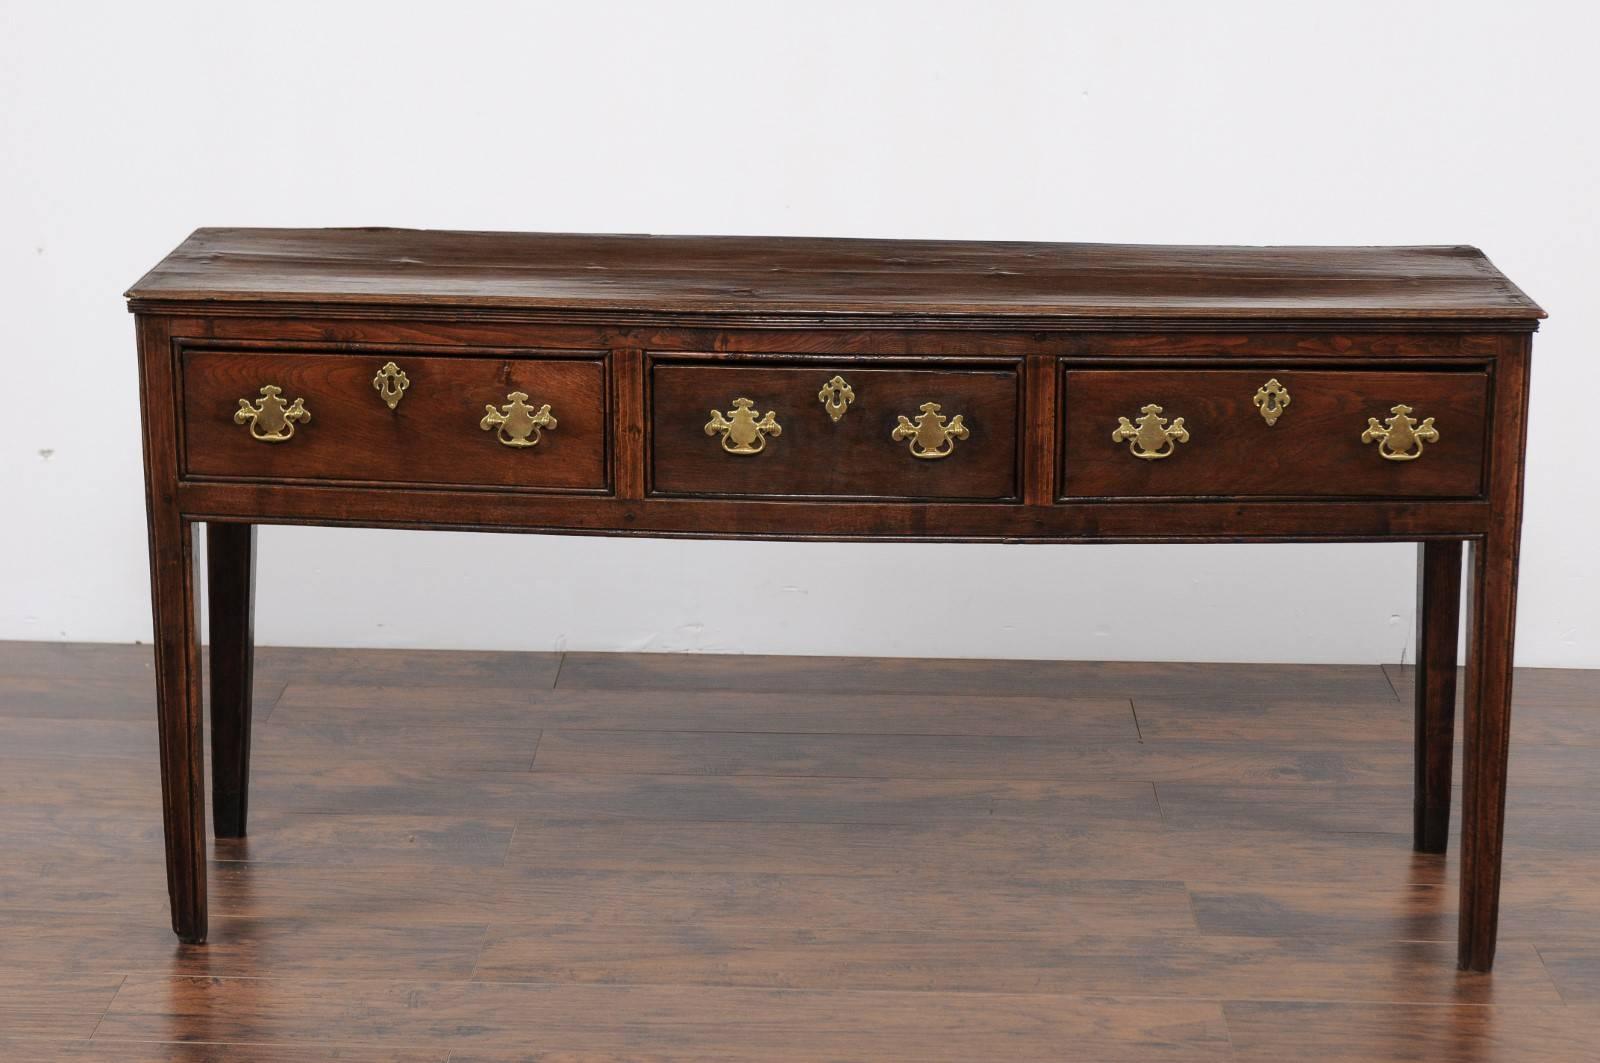 An English Georgian period oak dresser base from the early 19th century with three drawers and straight legs. This exquisite server was born during the reign of King George III of England. Featuring a rectangular planked top with a delicately reeded